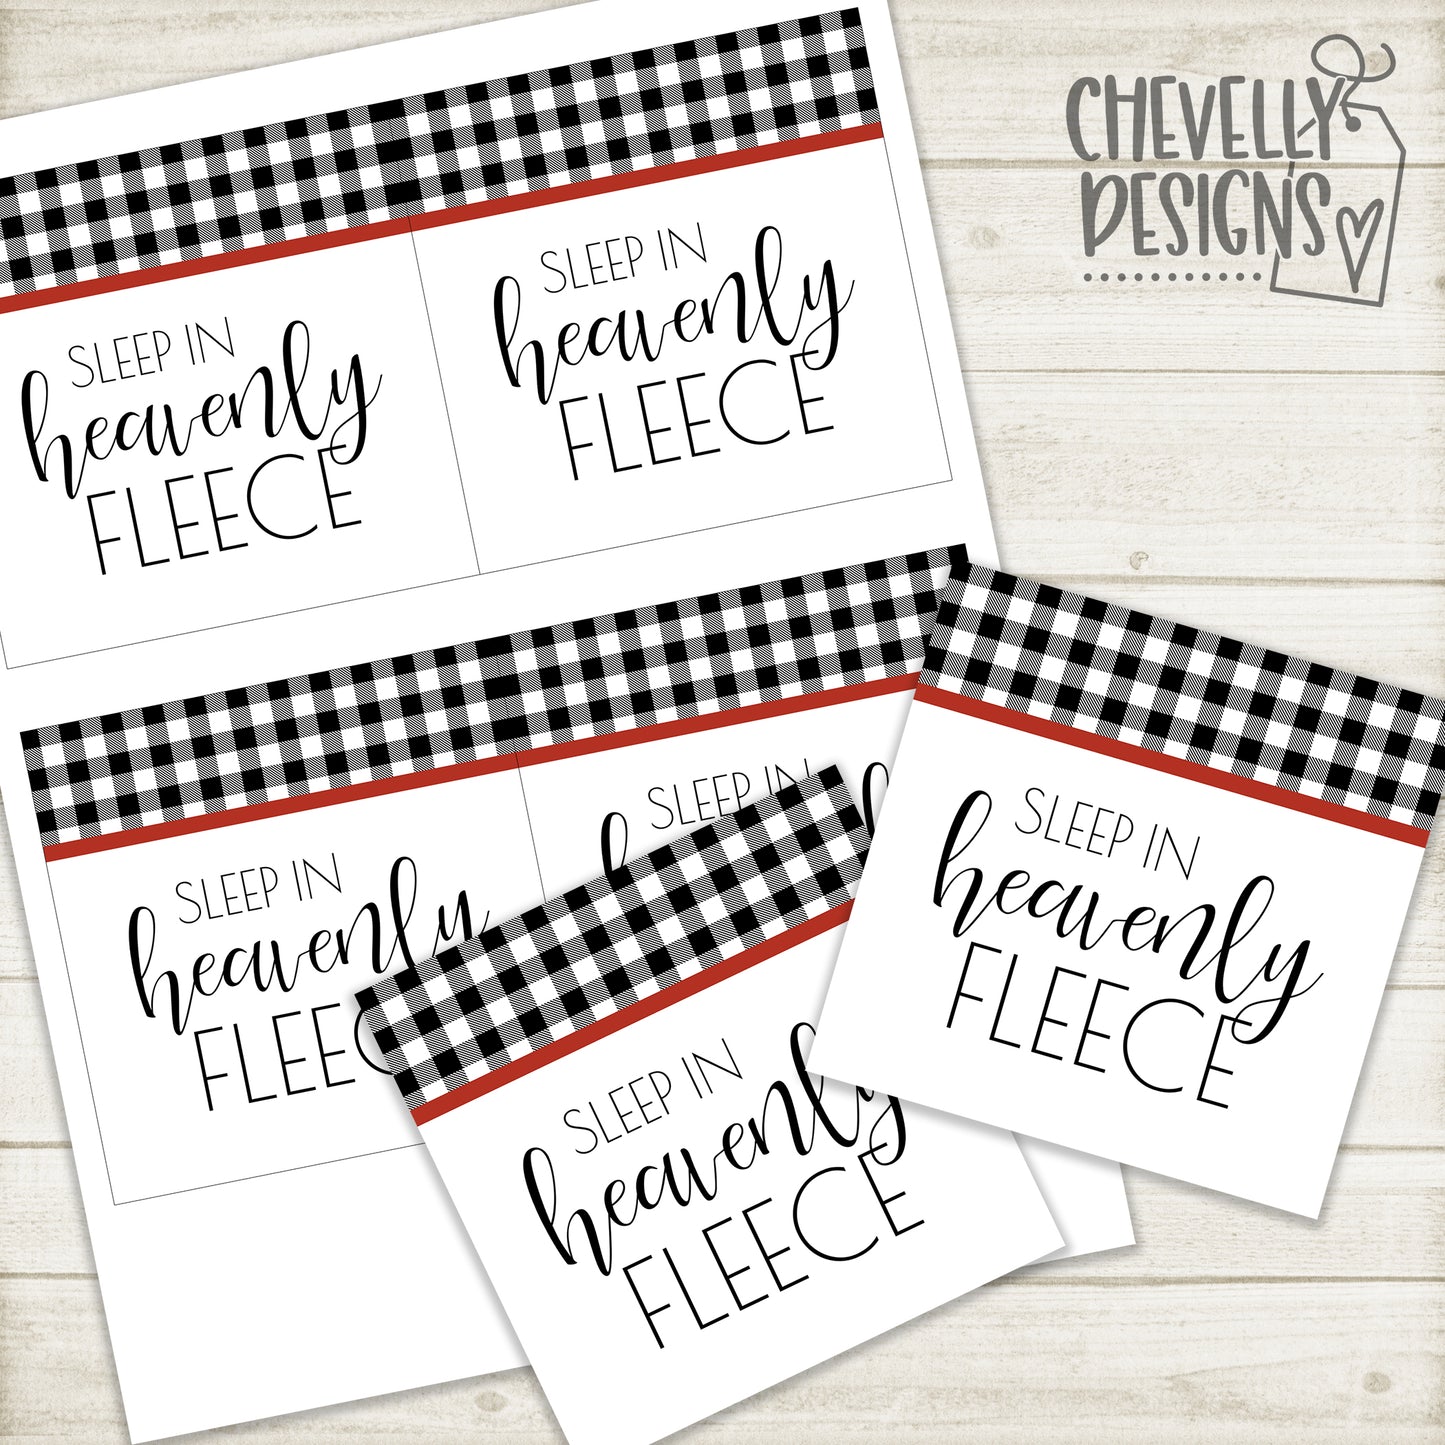 Printable - Sleep in Heavenly Fleece - Gift Tags in Black and White Buffalo Check >>>Instant Digital Download<<<